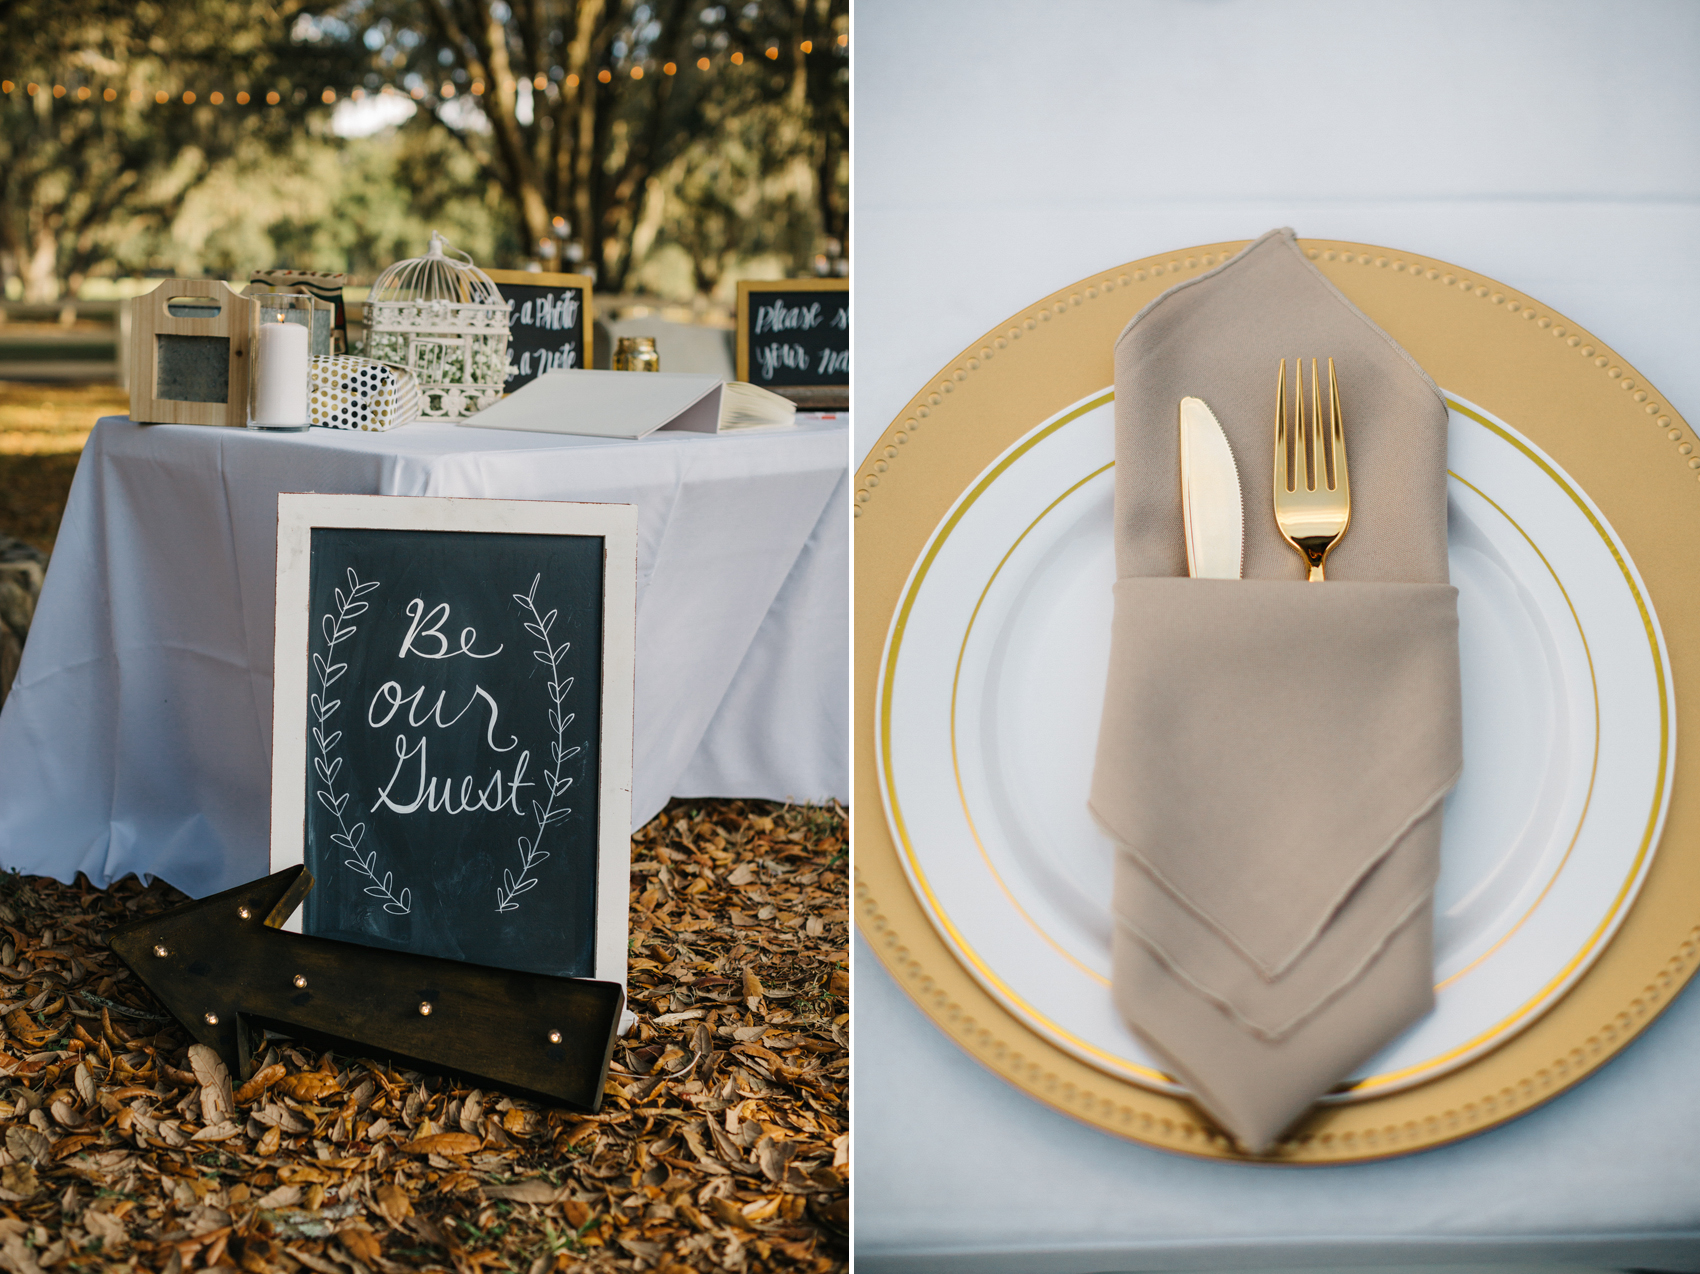 rustic chalkboard, gold flatware, and vintage decor for outdoor wedding at the Lange farm